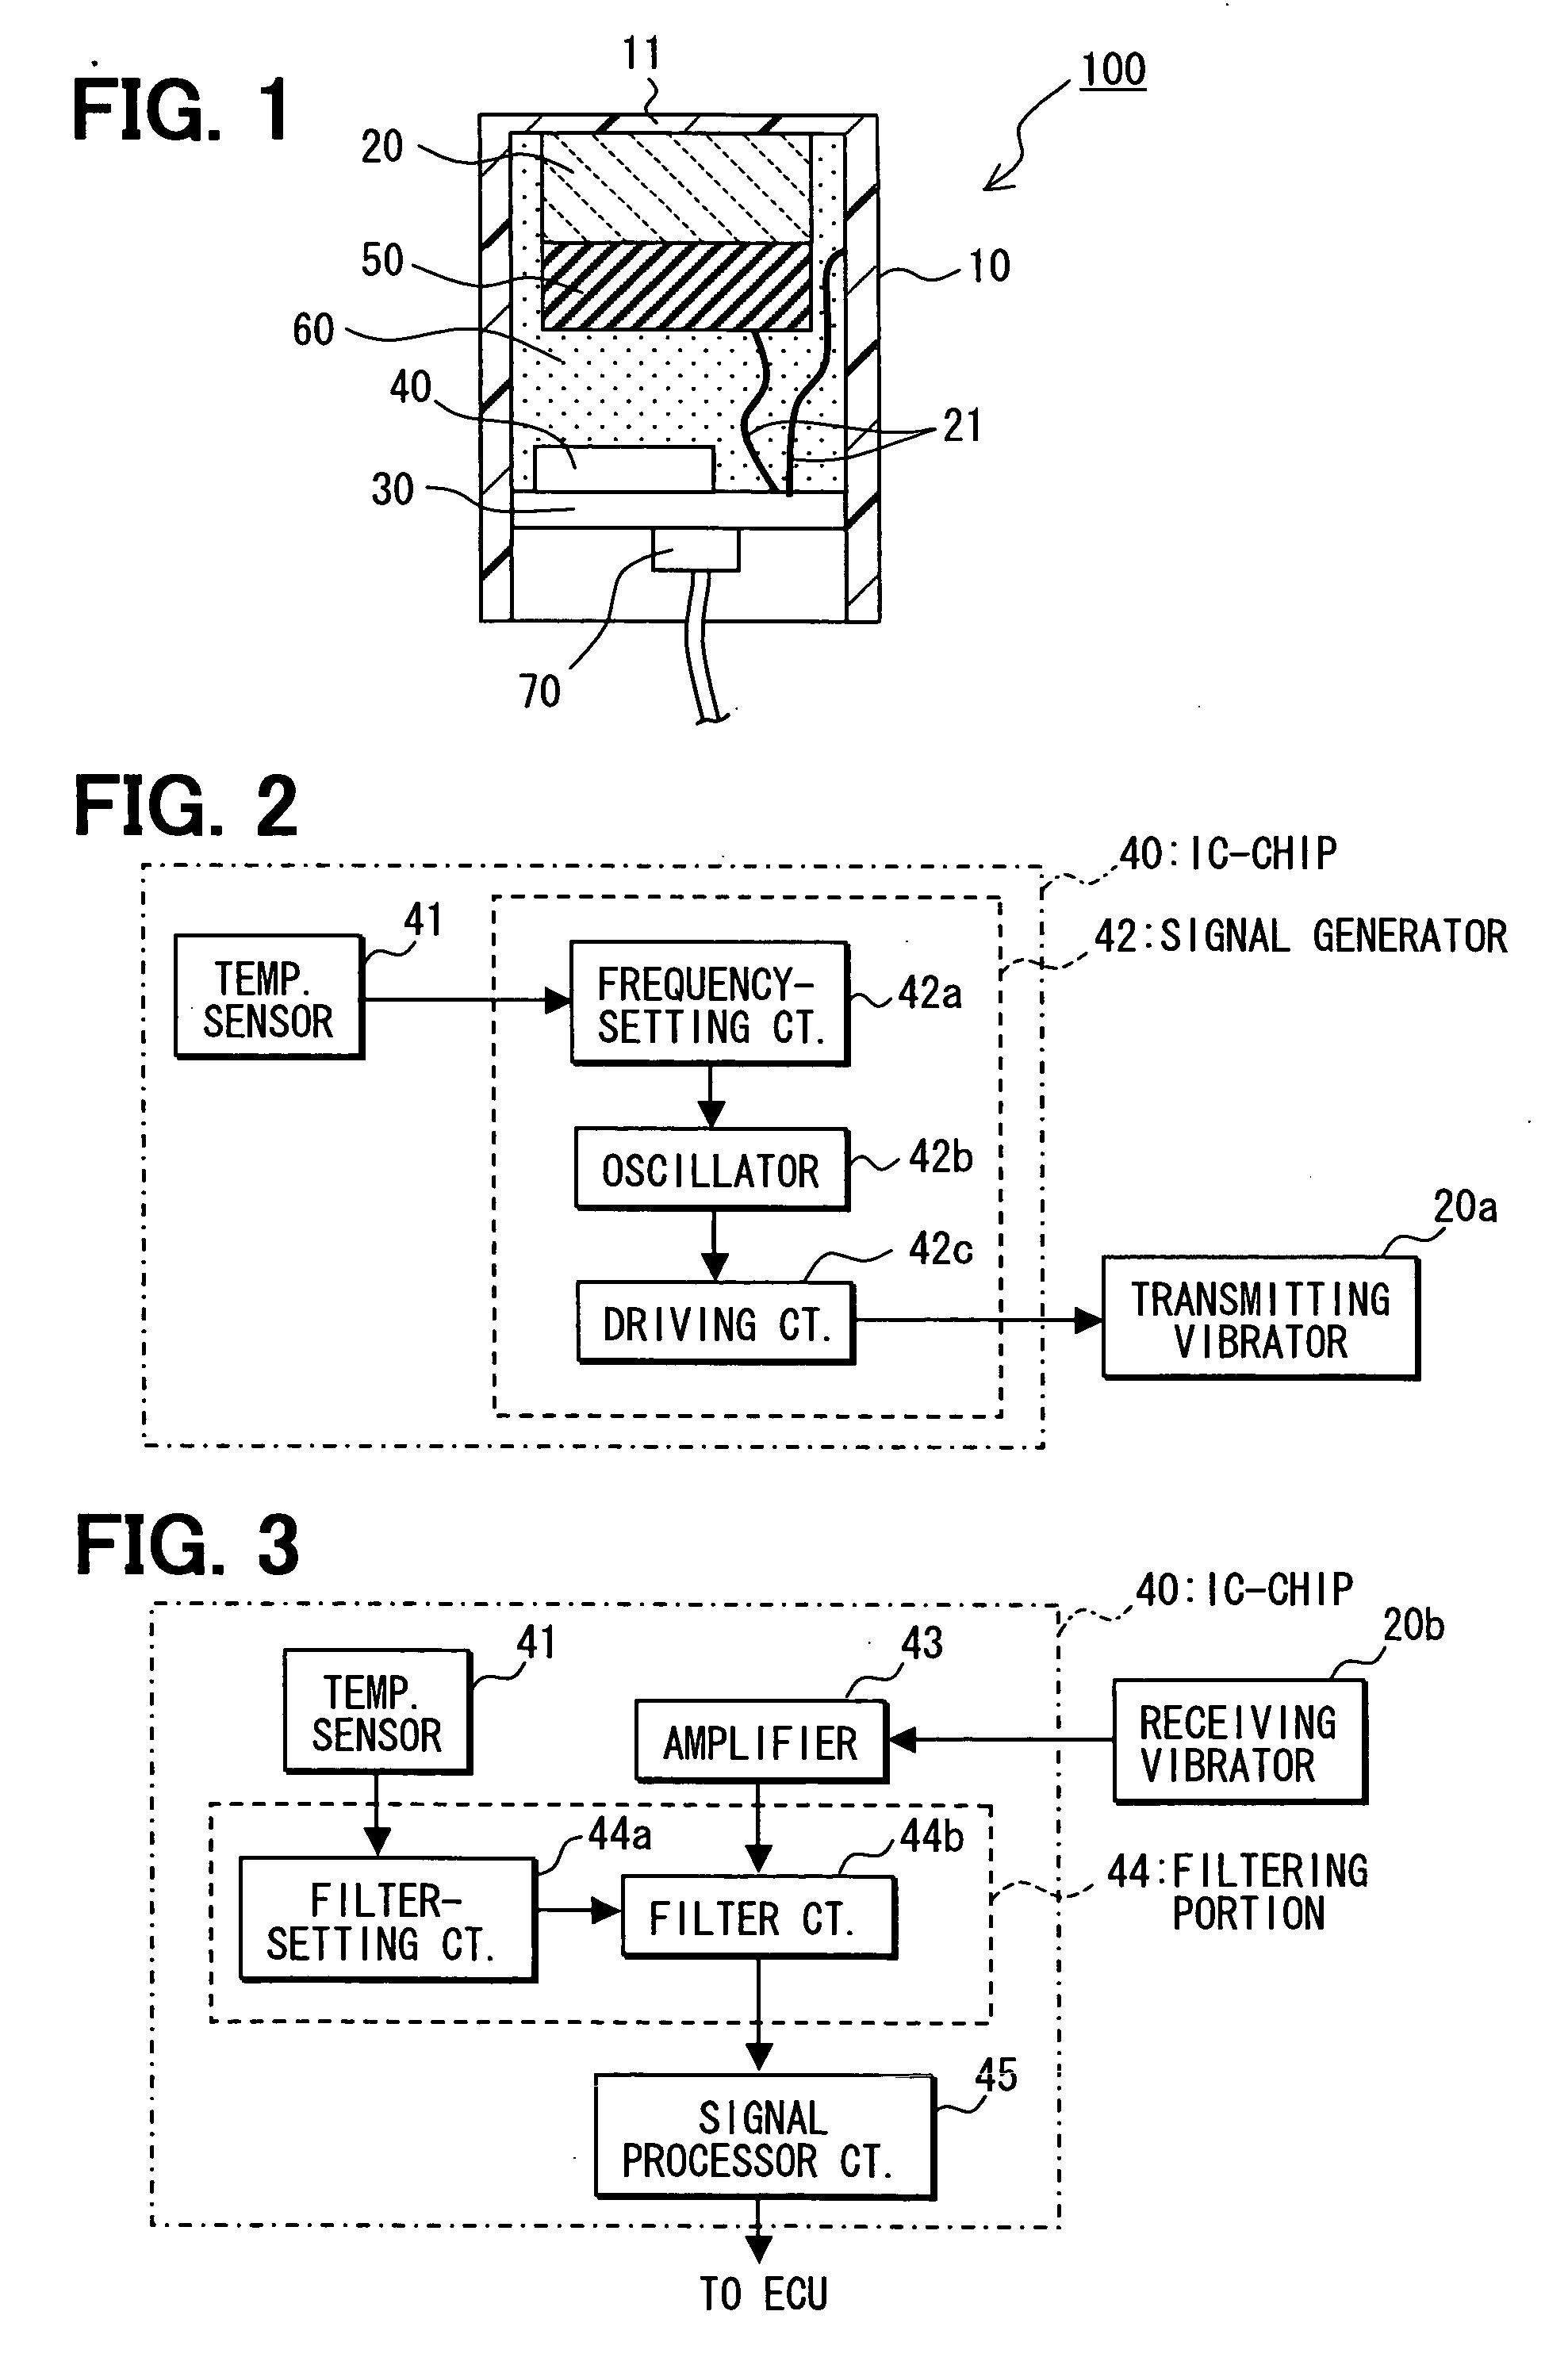 Ultrasonic sensor transmitting and receiving ultrasonic frequencies adjusted according to temperature